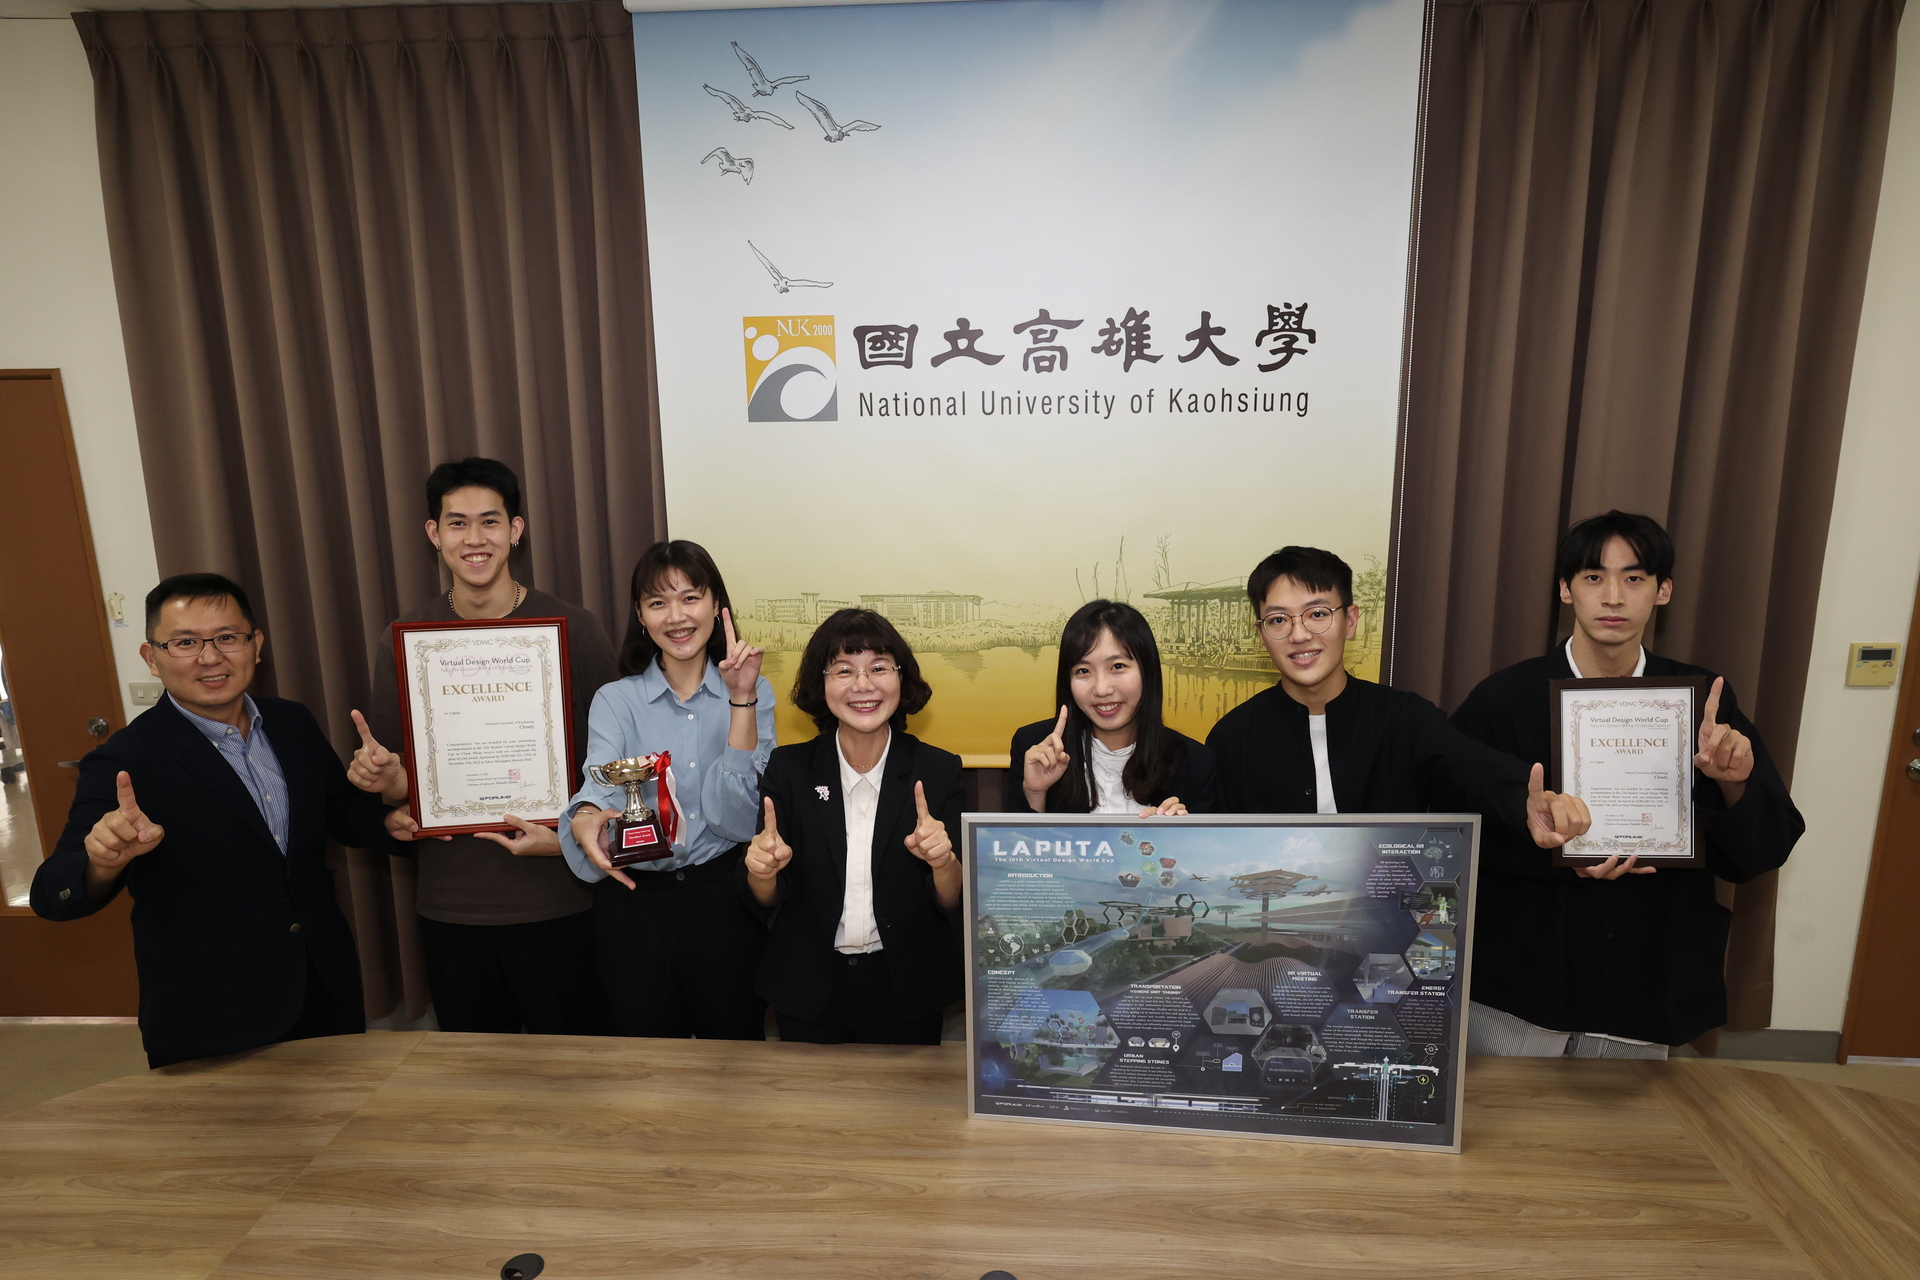 Teachers and students of XR Micro-learning Program went to Japan to join VDWC 01